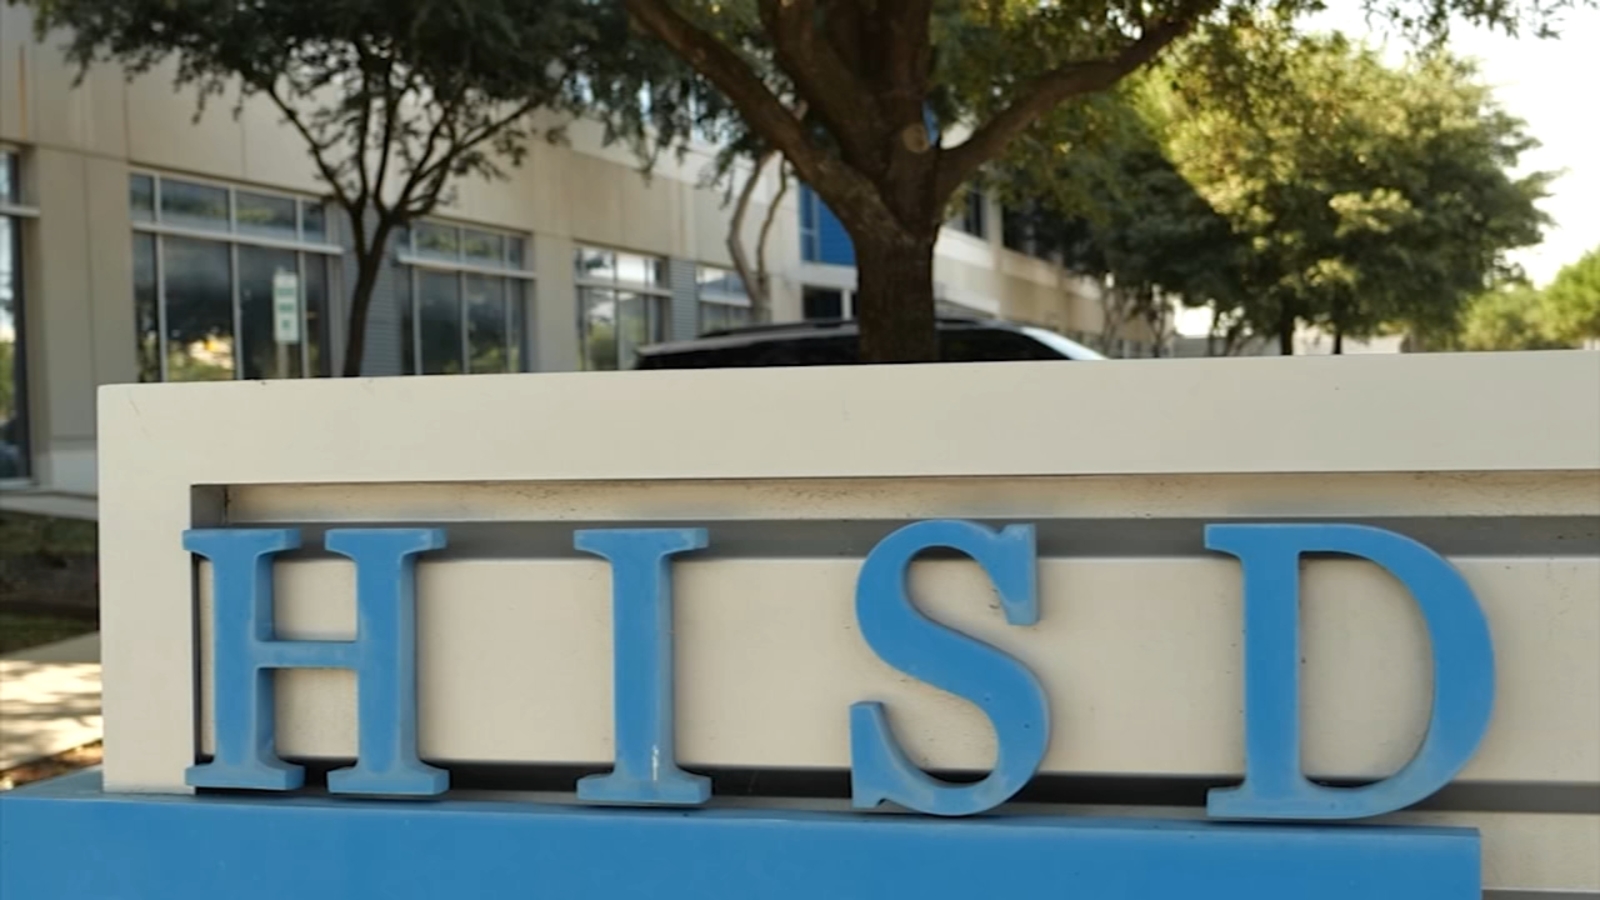 Texas Education Agency takes over HISD: 1 year review steeped in controversy [Video]